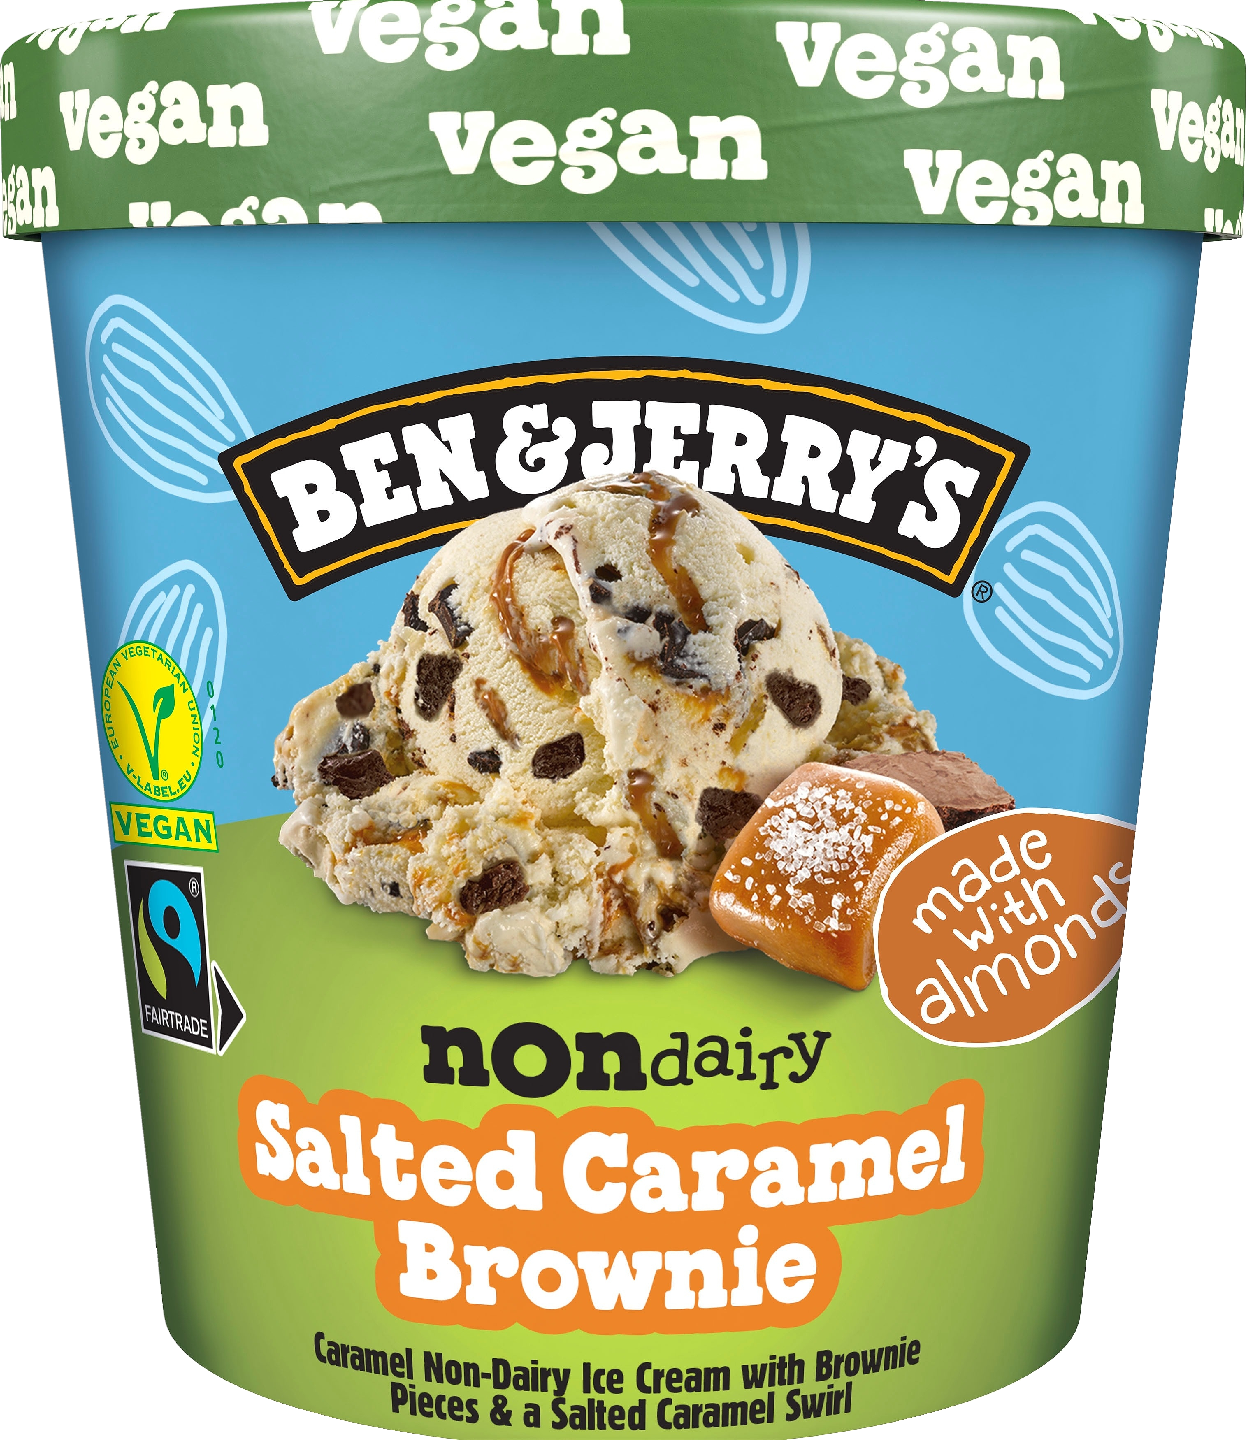 Ben&Jerry's 465ml pint Non-Dairy Salted Caramel Brownie